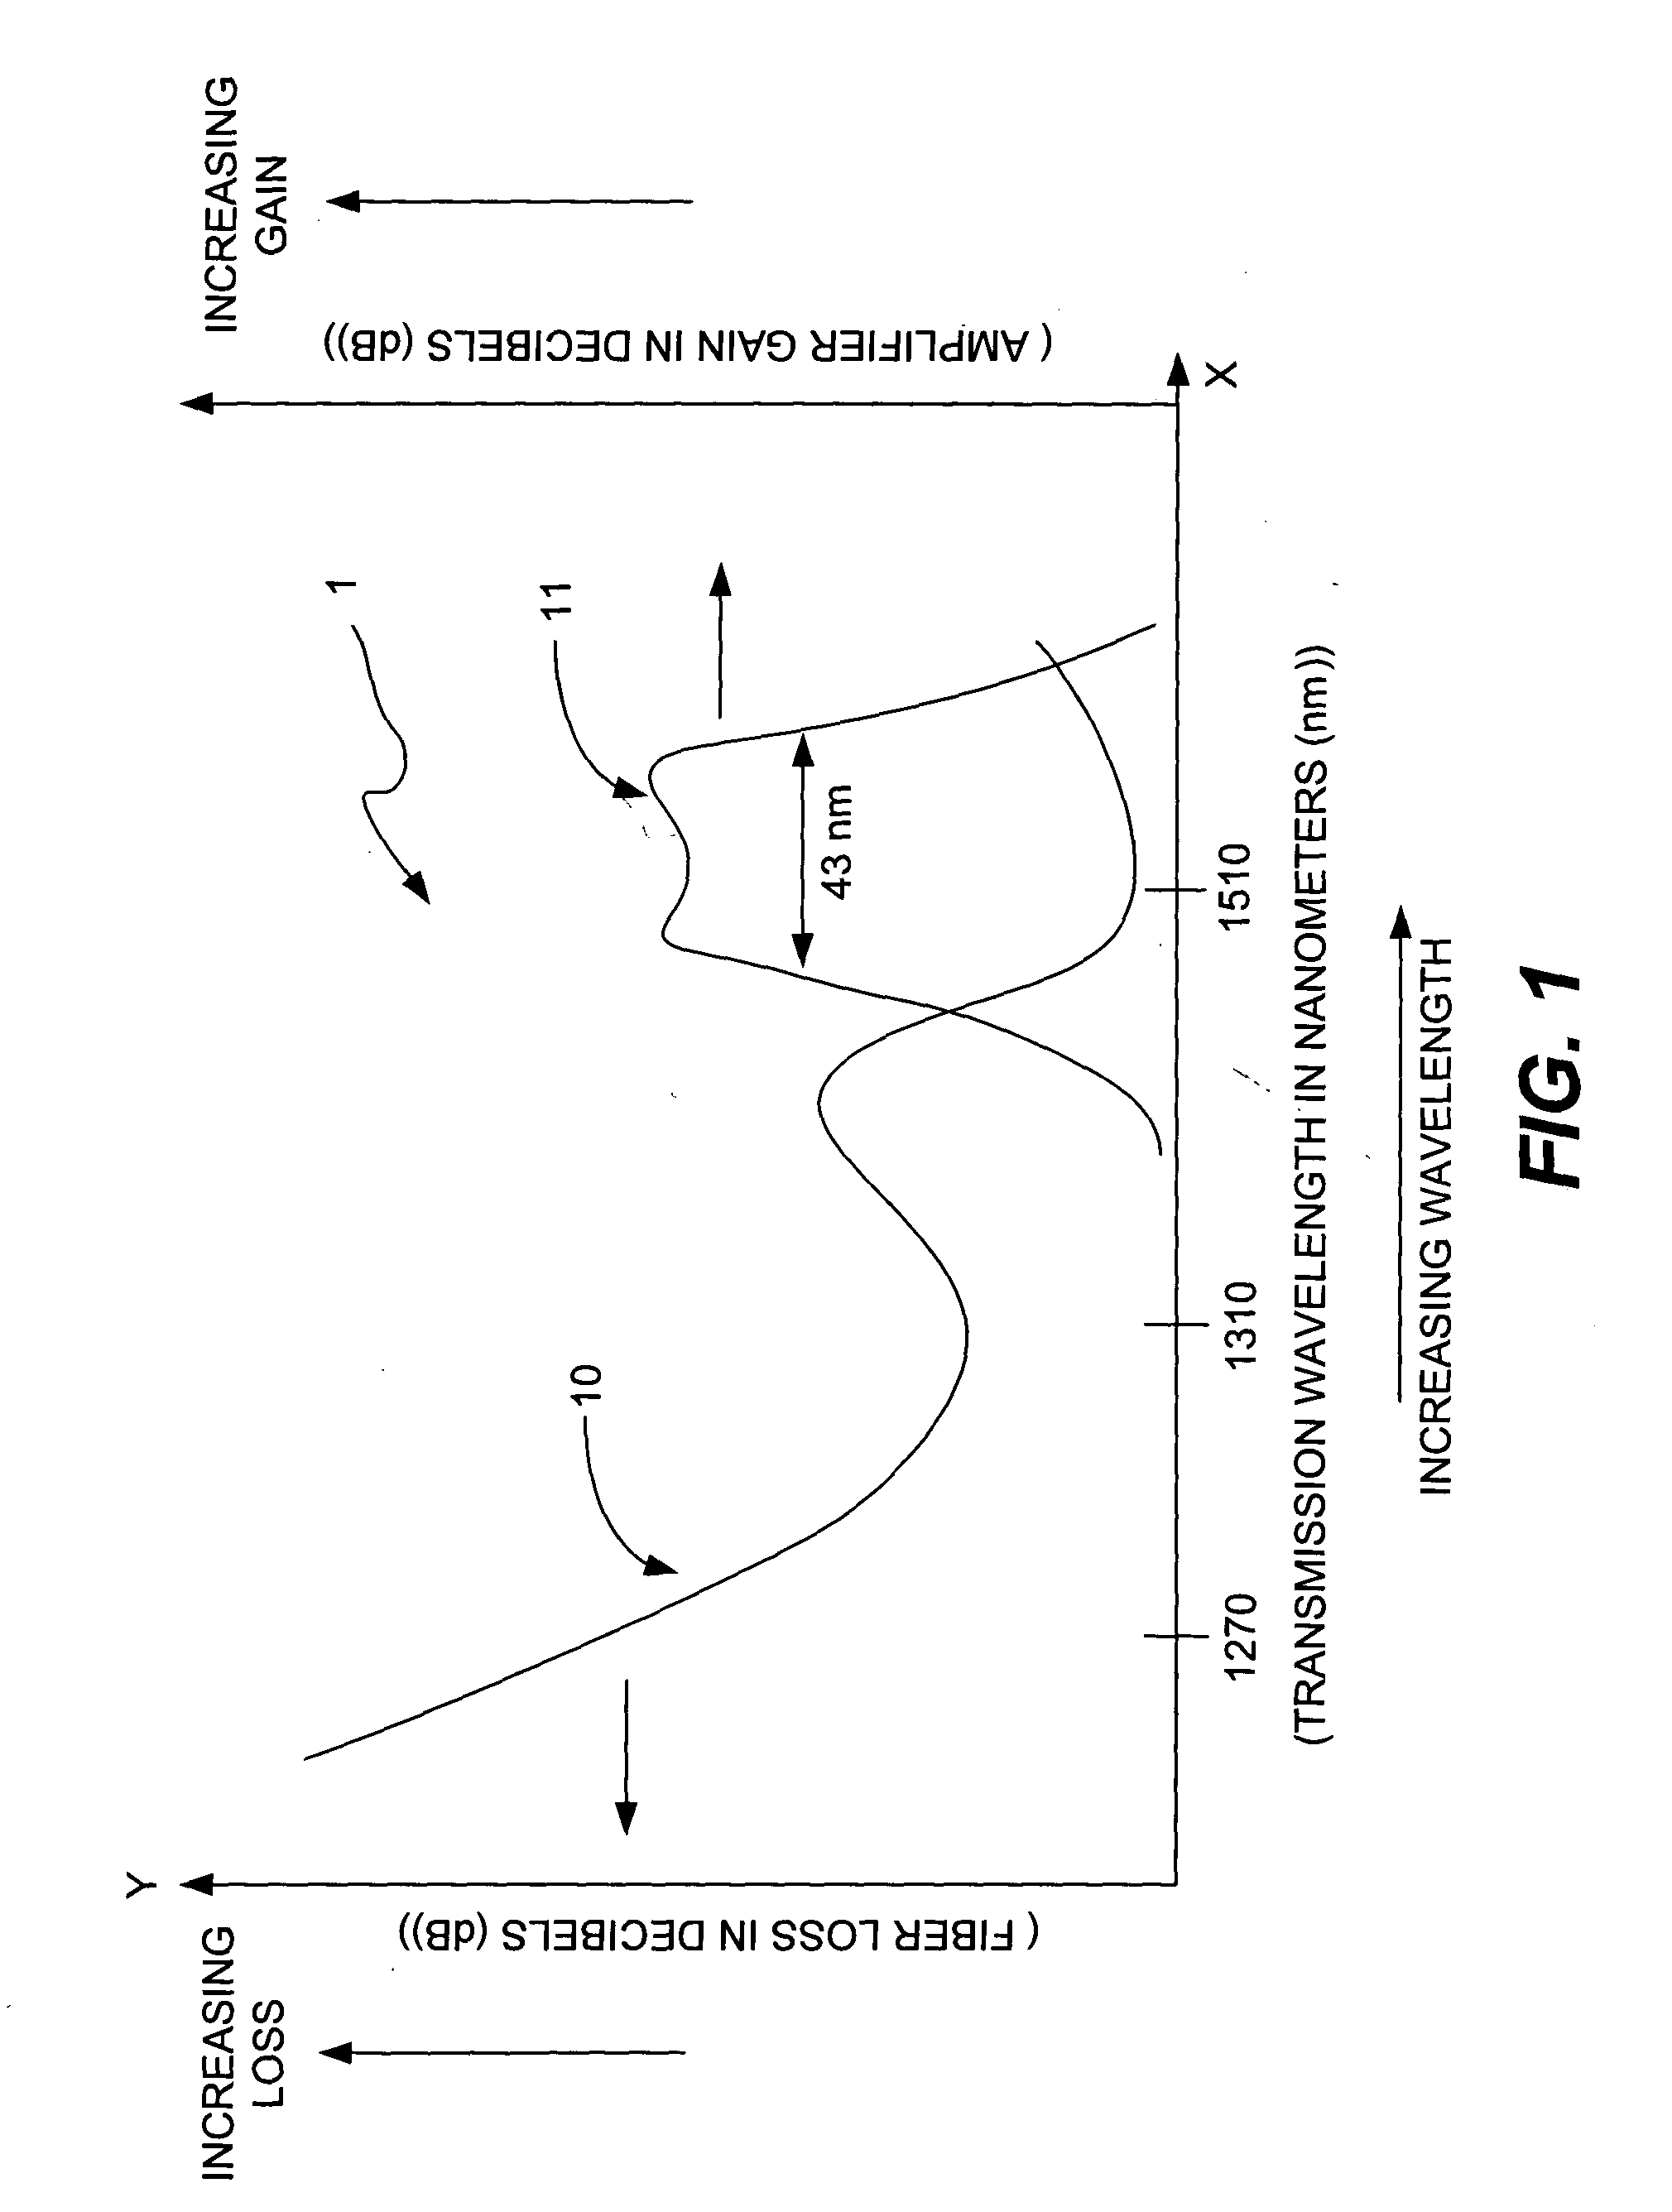 Optical communication system and method using spread-spectrum encoding